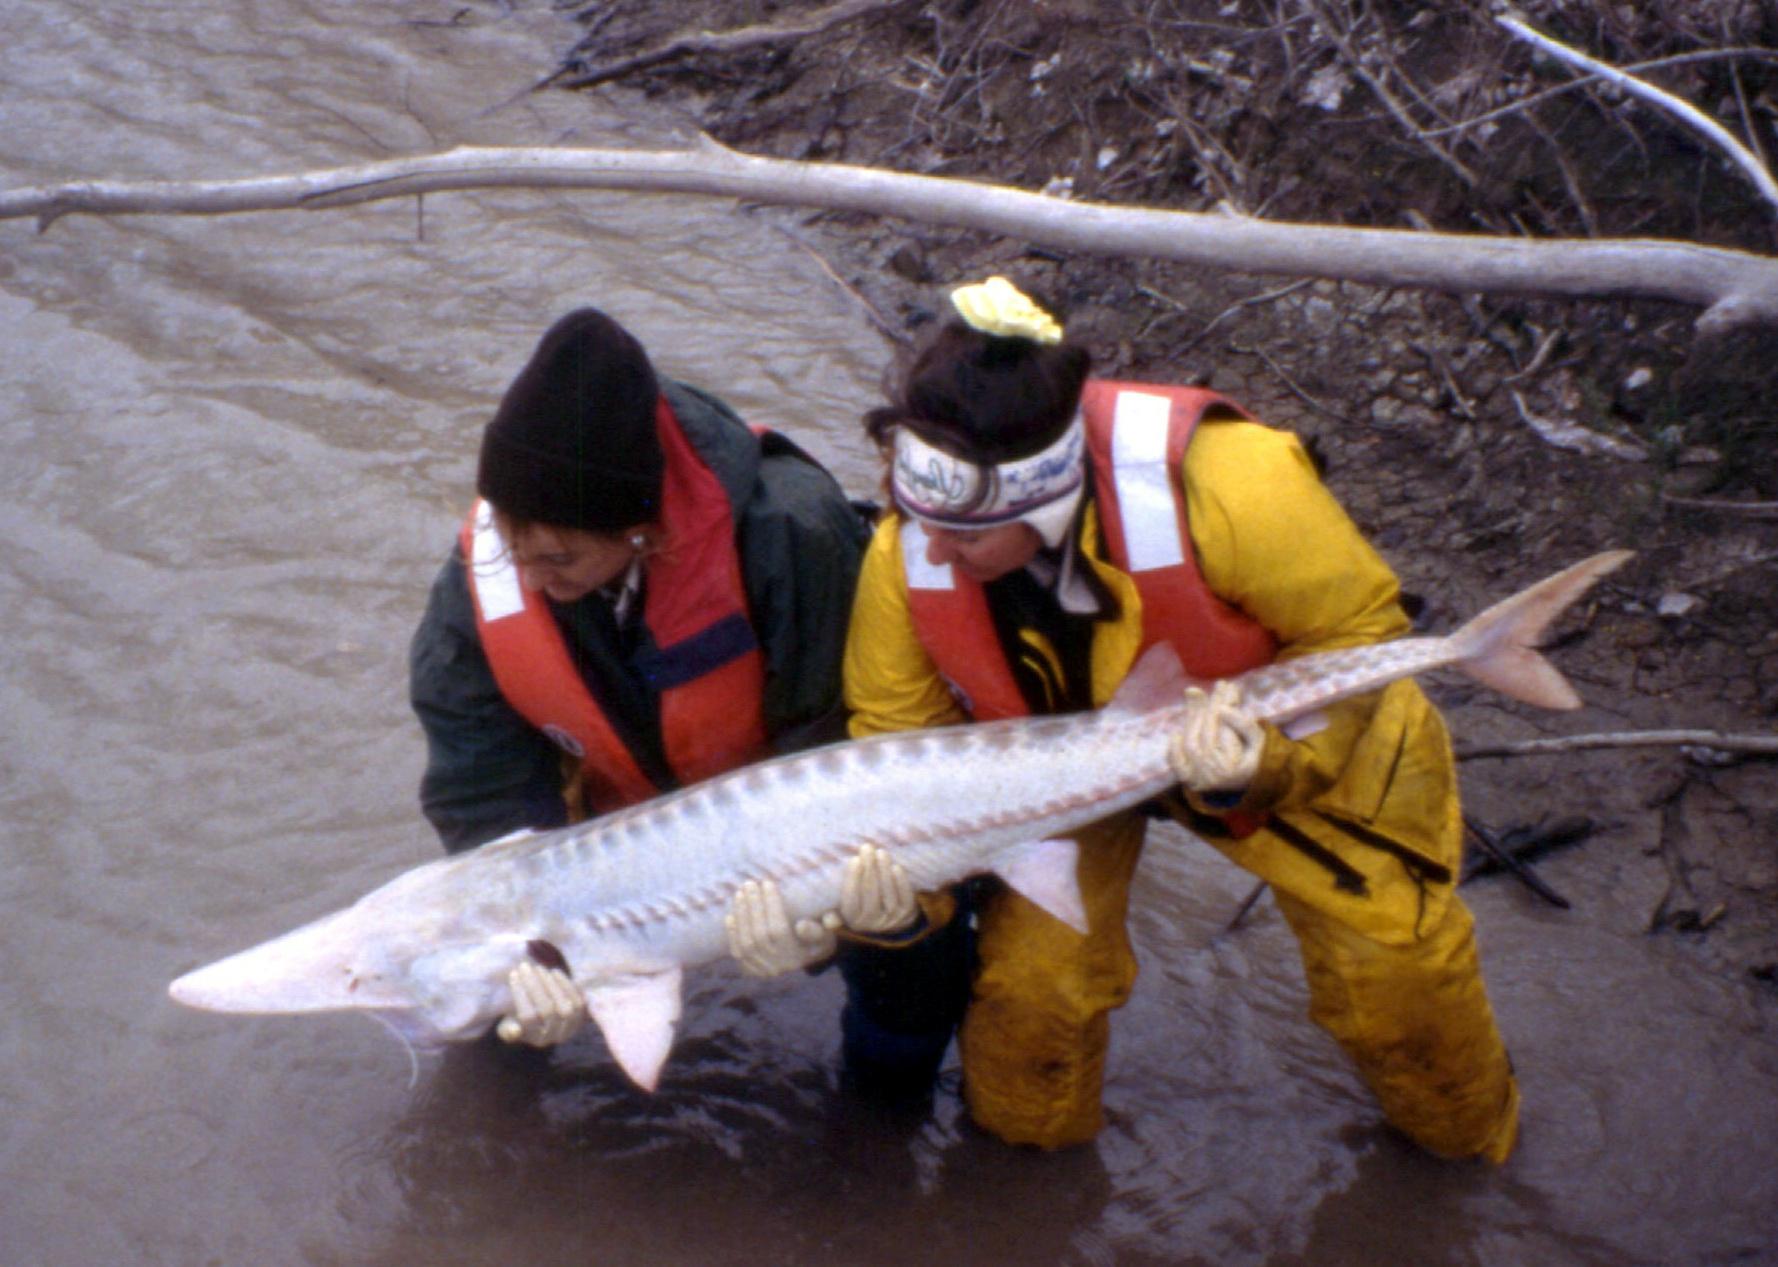 USFWS employees release a pallid sturgeon into the Yellowstone River.